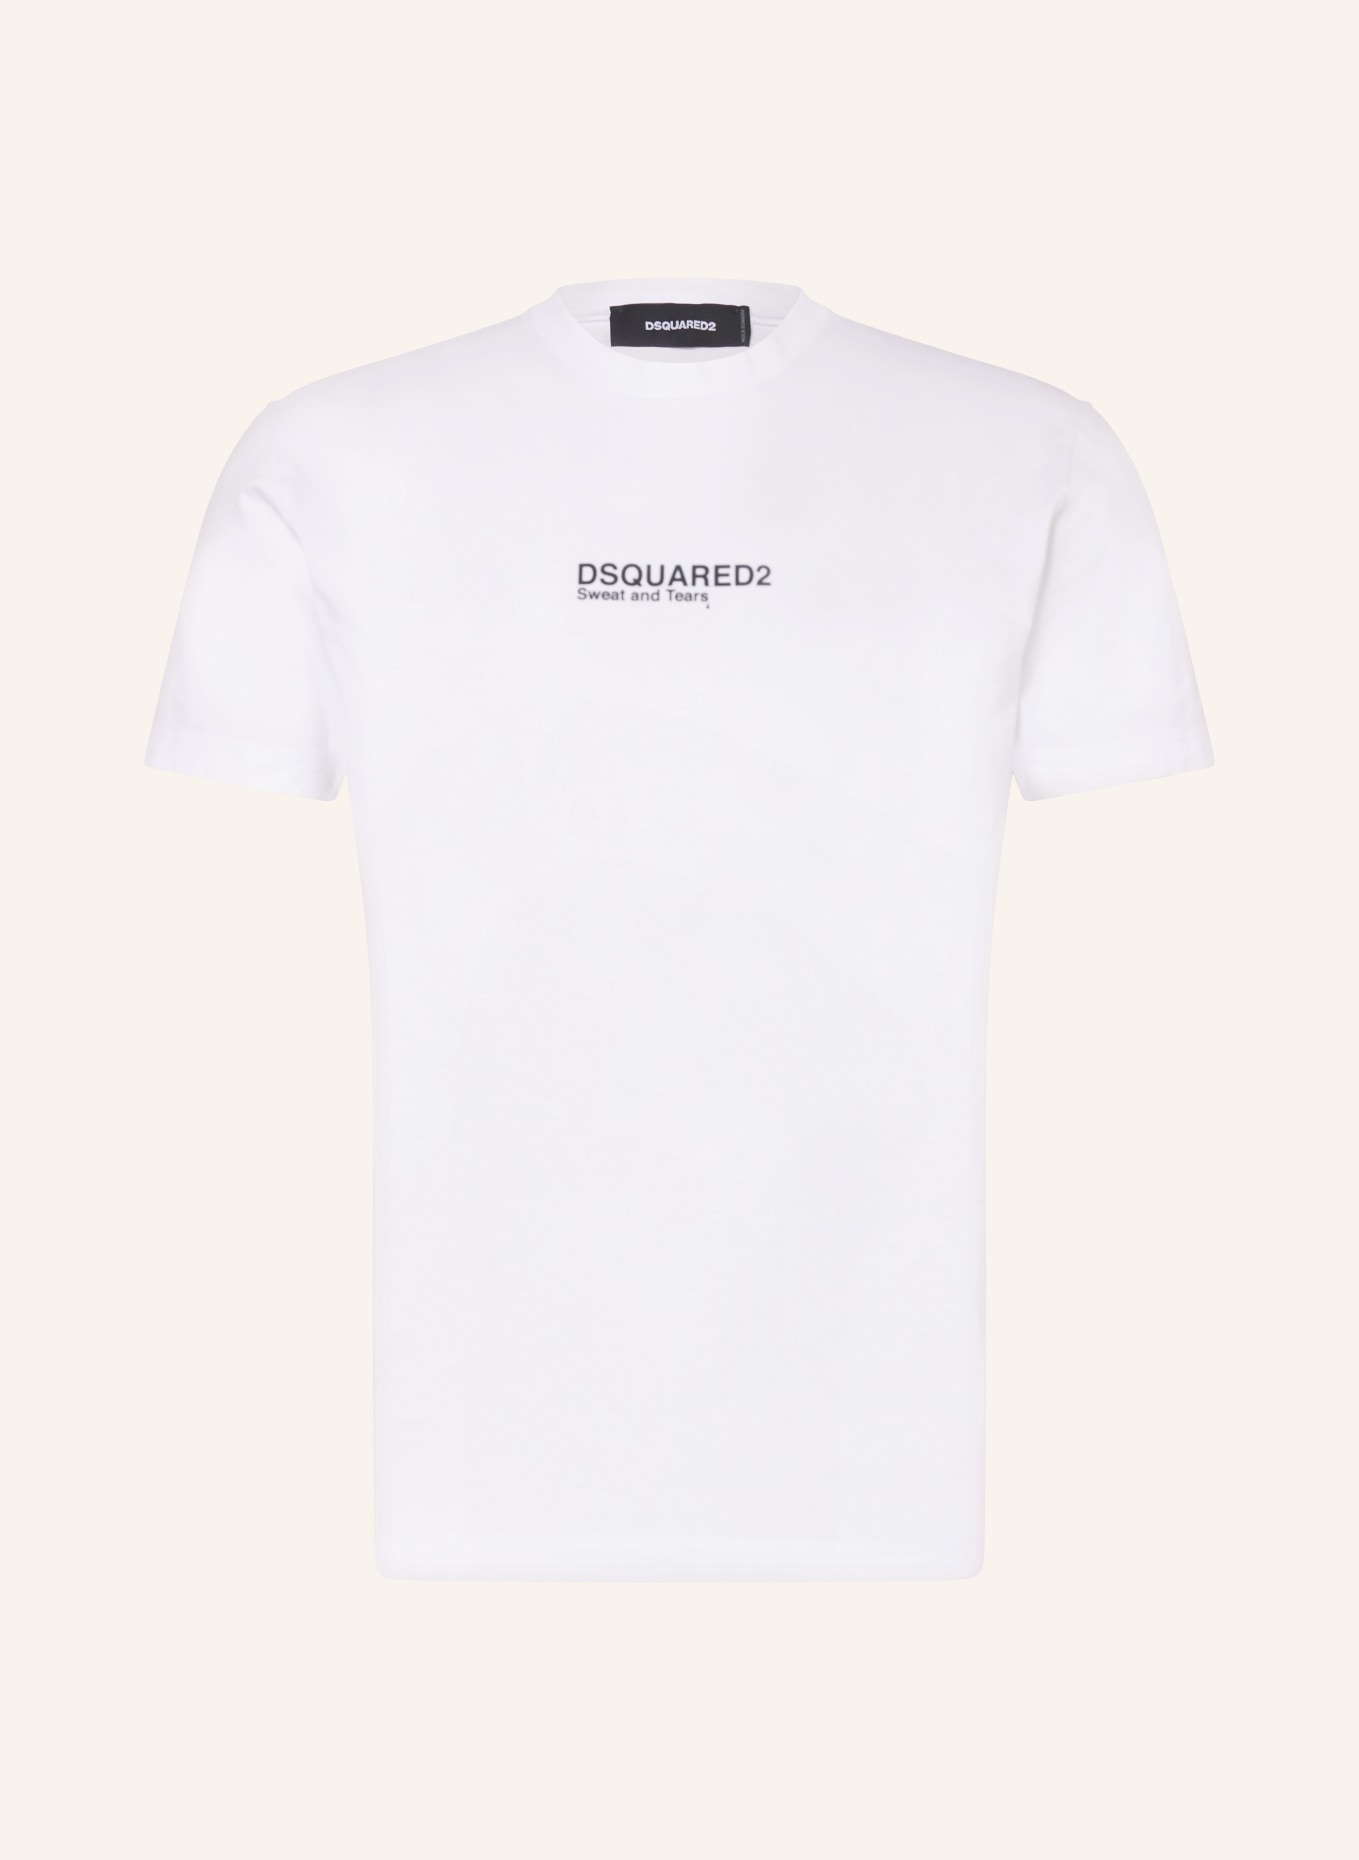 DSQUARED2 T-shirt SWEAT AND TEARS, Color: WHITE (Image 1)